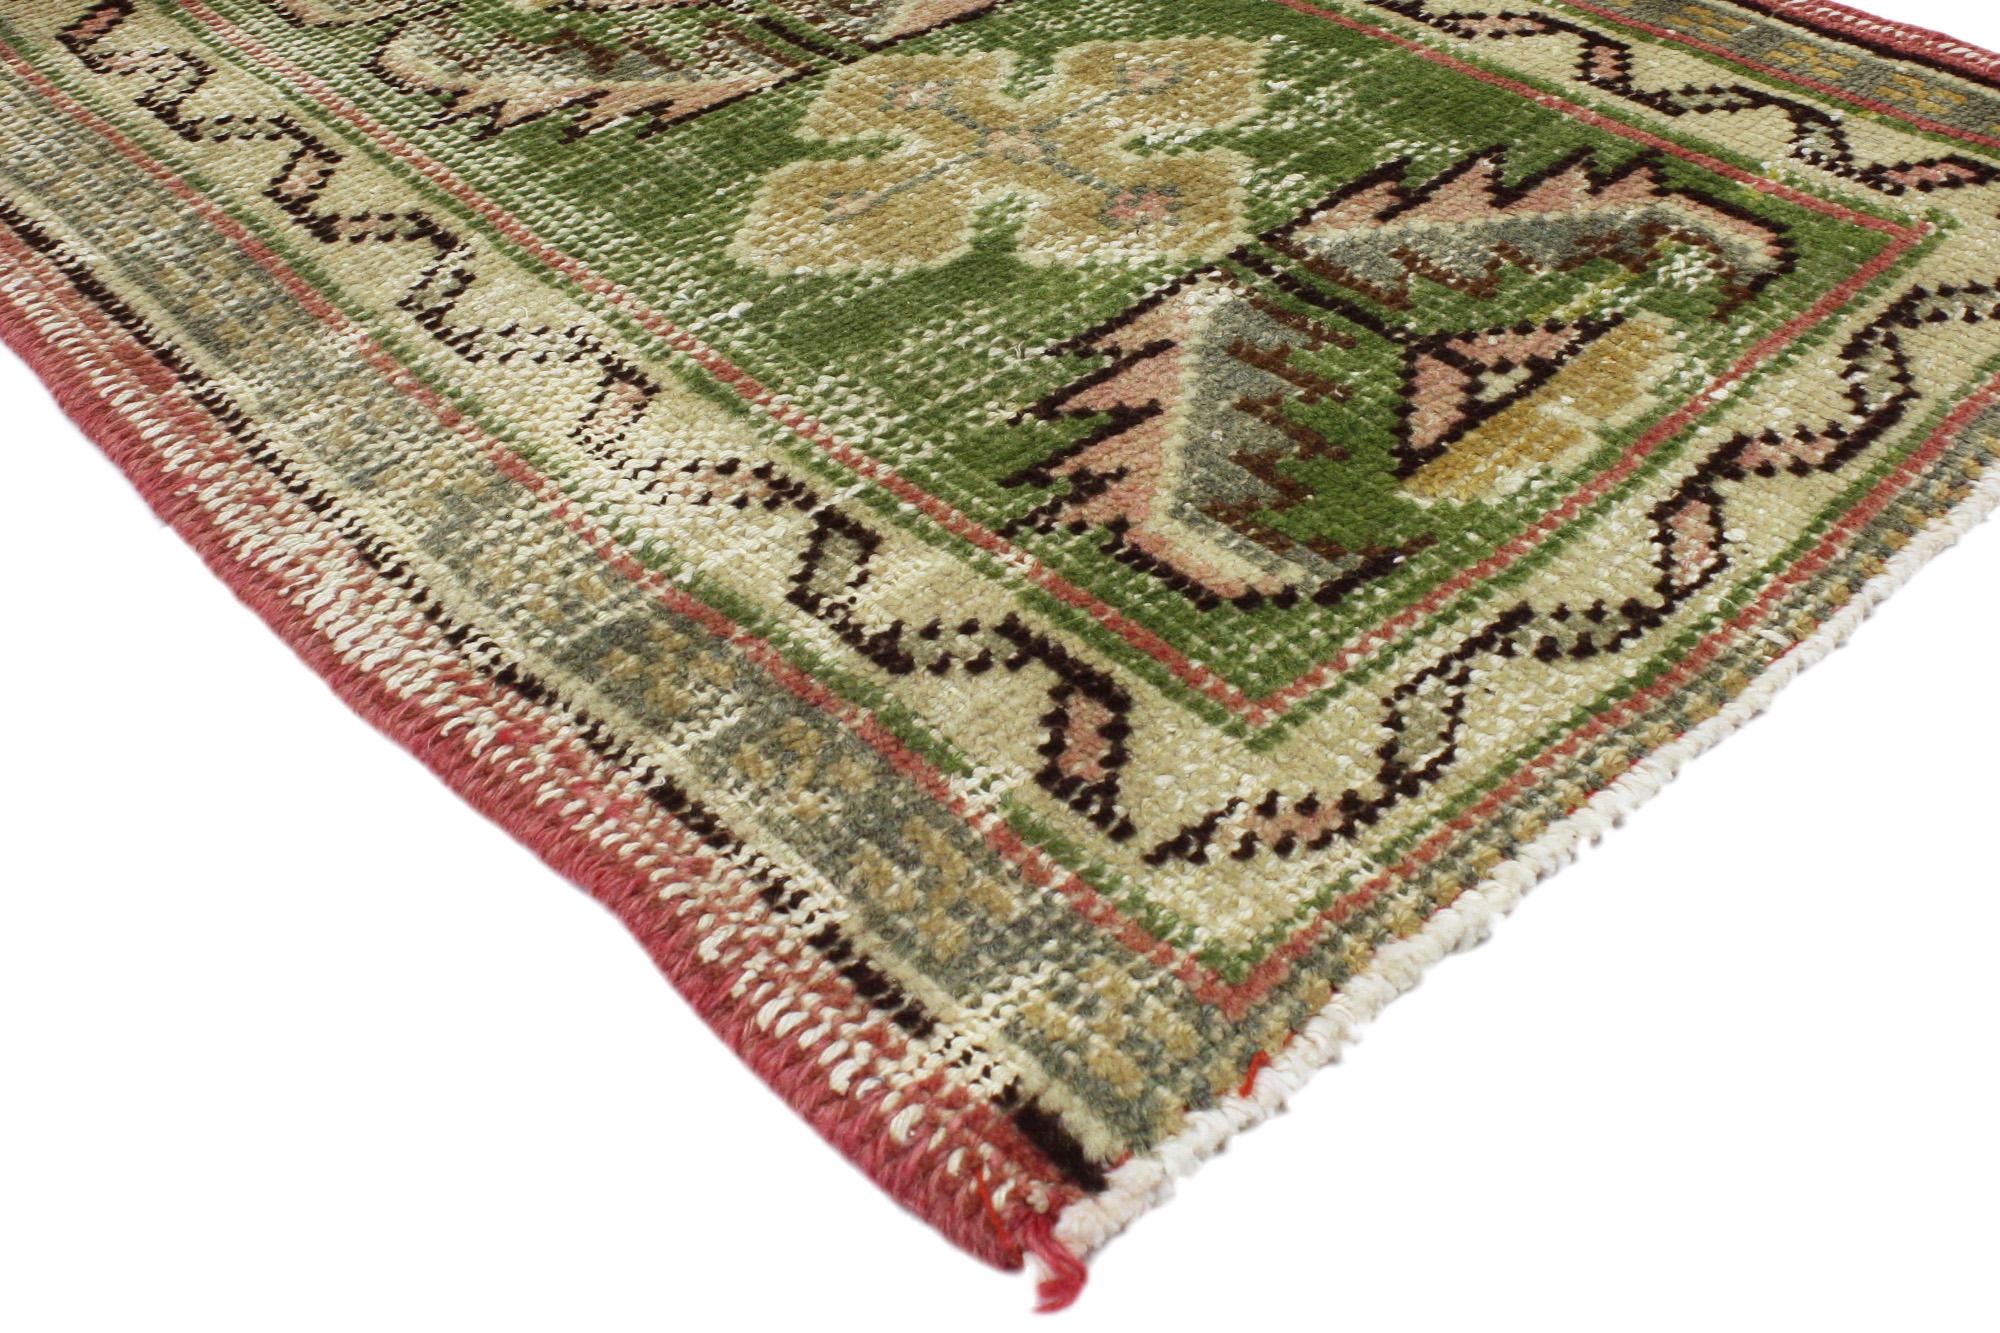 51713 Distressed Vintage Green Turkish Oushak Rug, 01'09 x 10'08. Infused with the principles of Biophilic Design, this hand-knotted wool distressed vintage Turkish Oushak rug runner offers a harmonious blend of natural elements and timeless